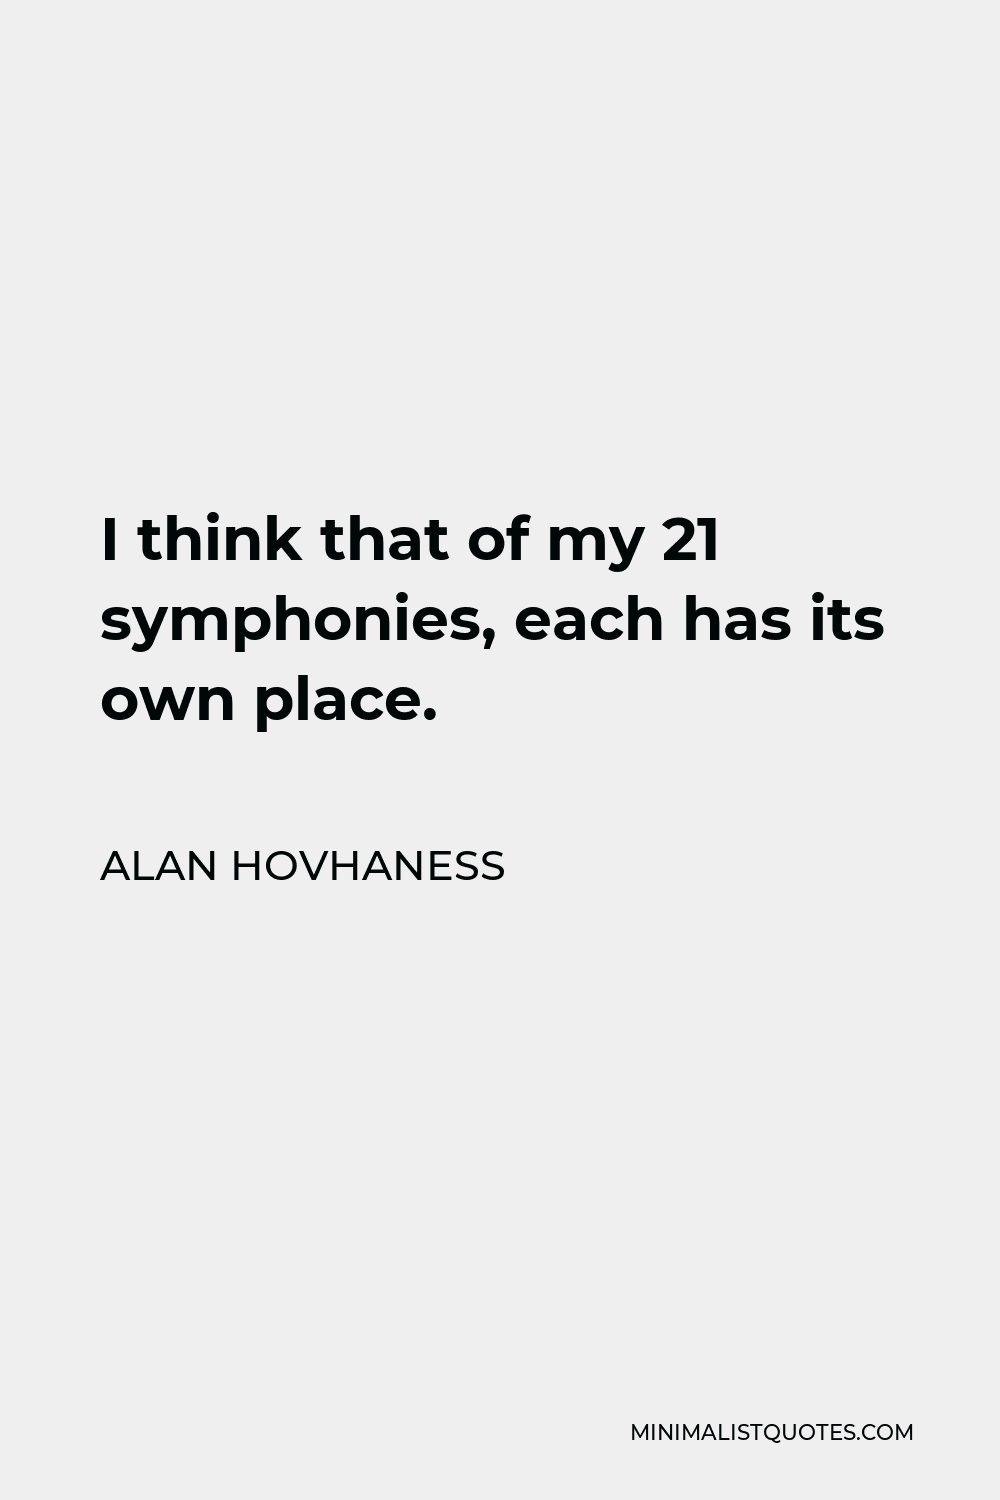 Alan Hovhaness Quote - I think that of my 21 symphonies, each has its own place.